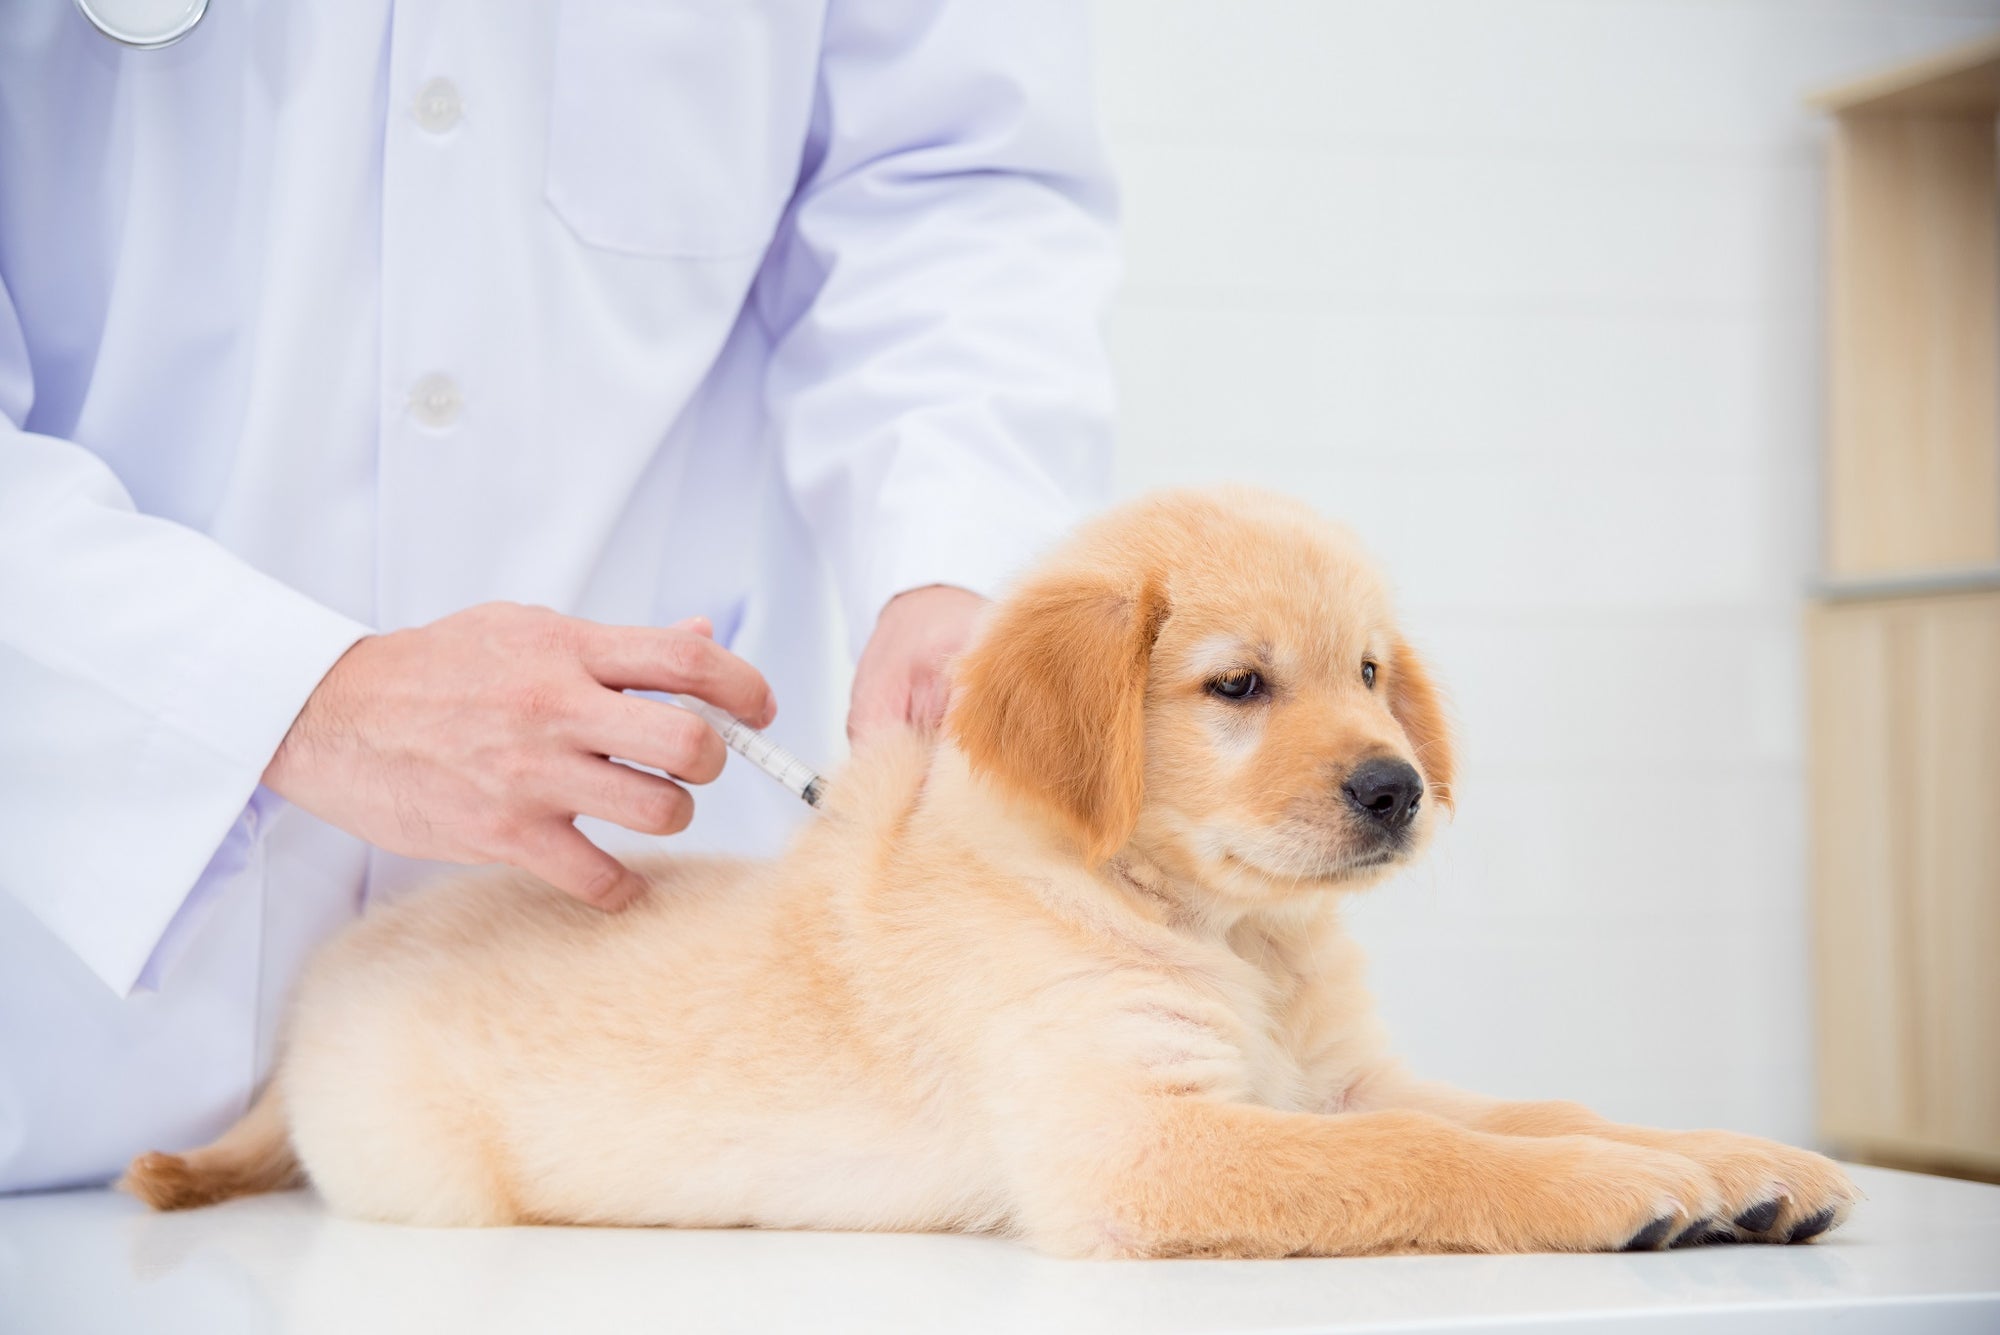 how often does a dog need a distemper shot